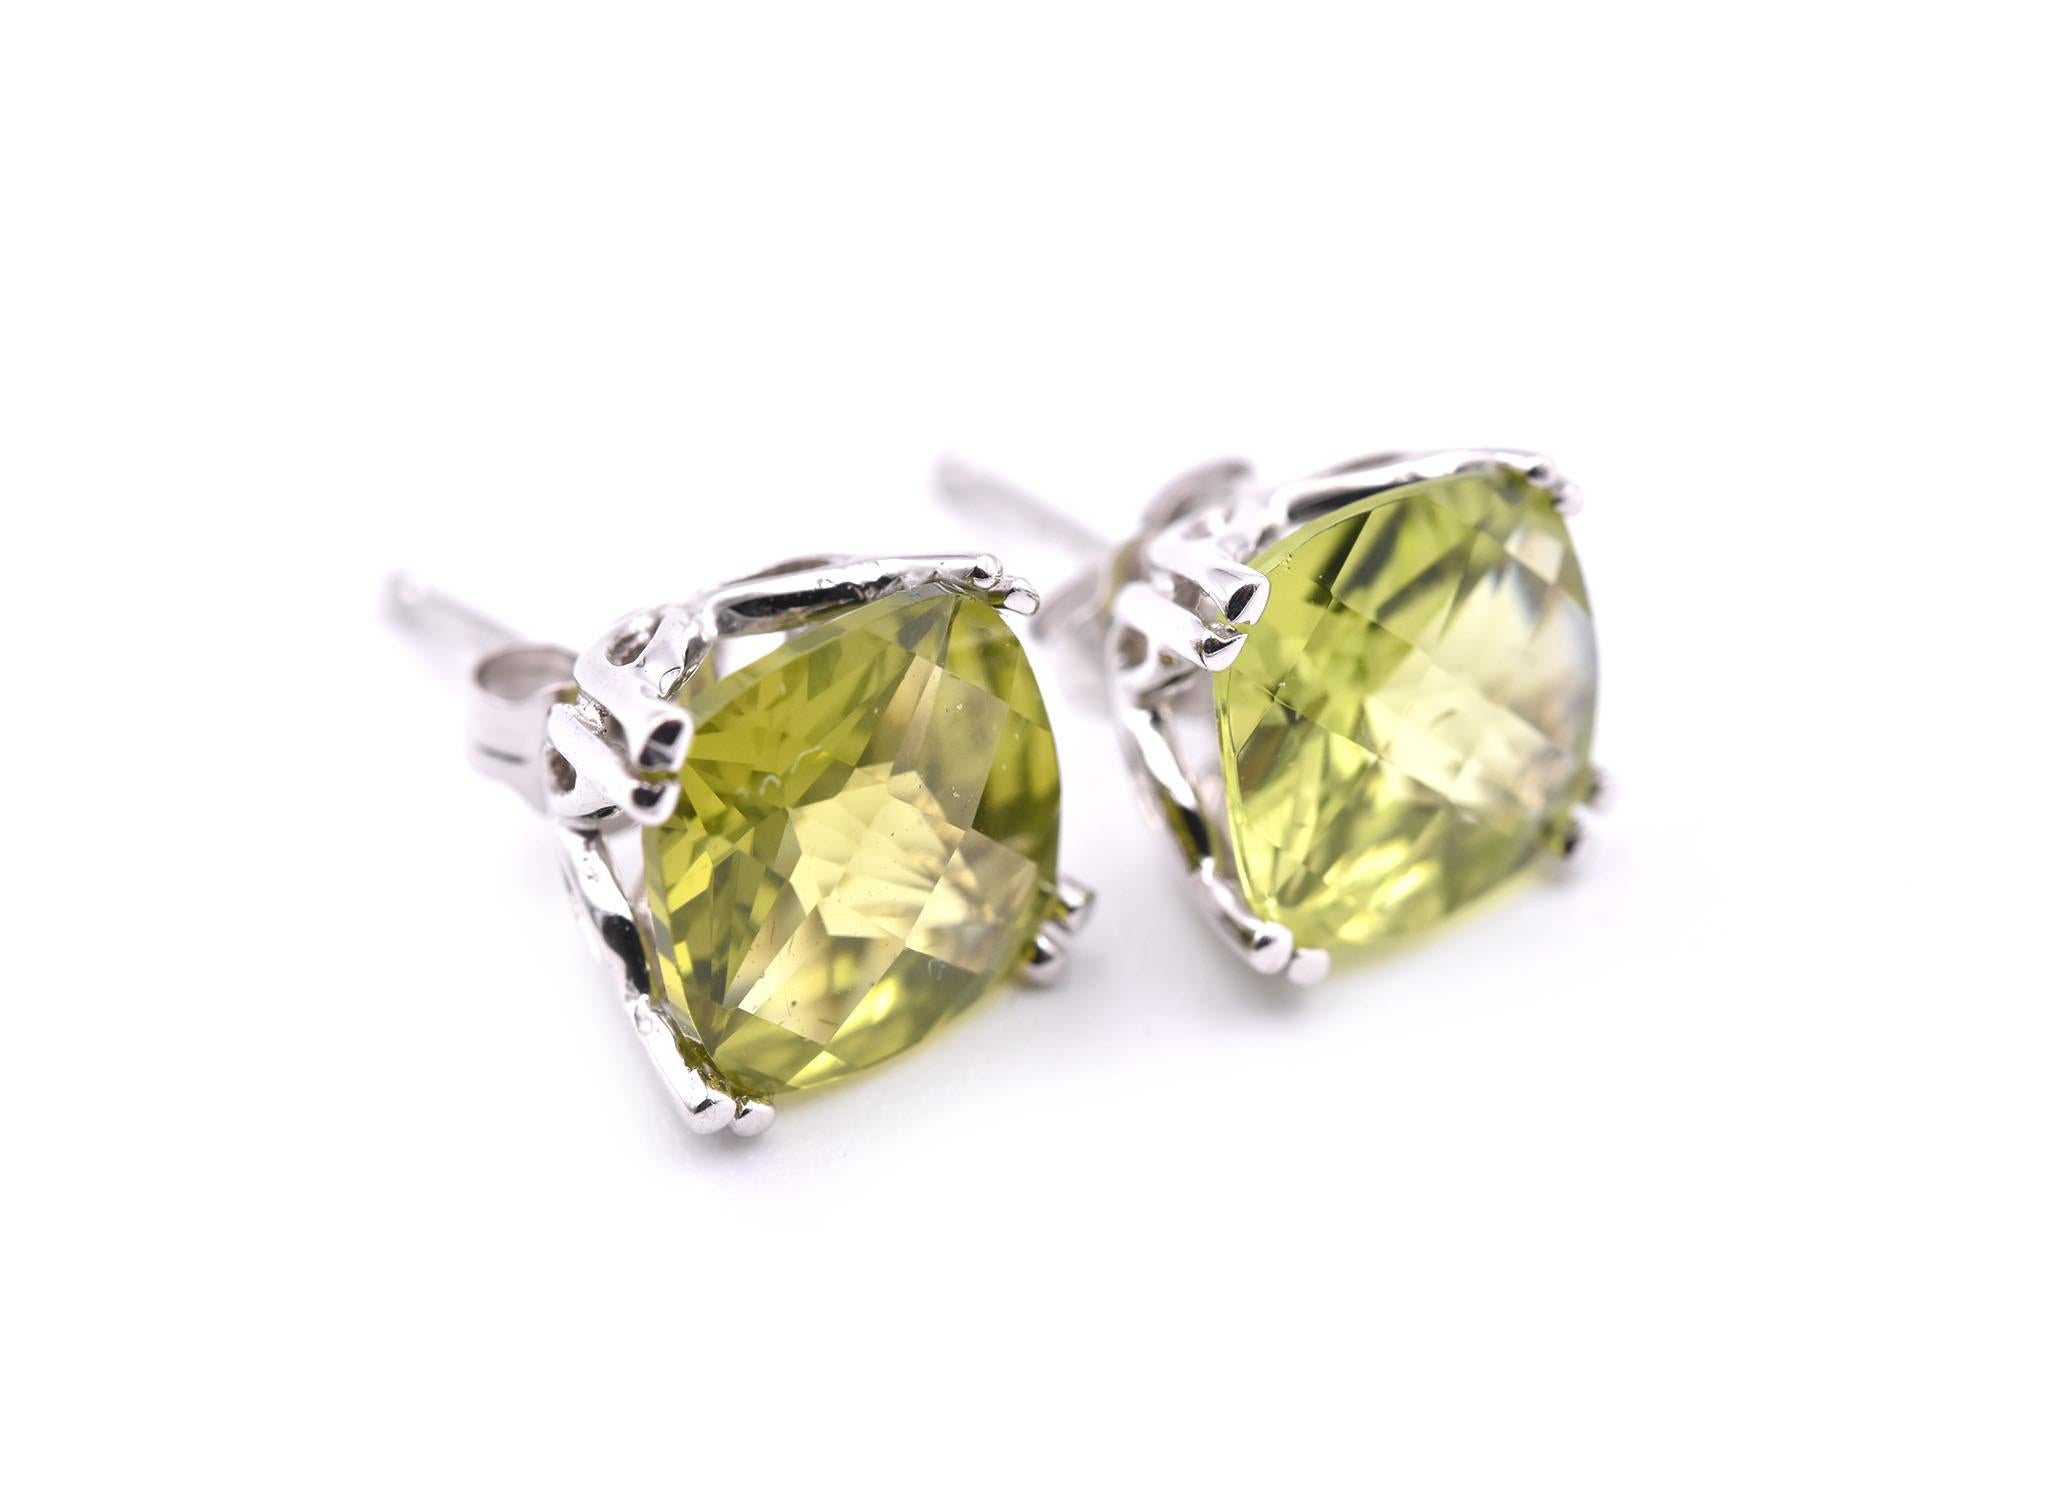 Designer: custom design
Material: 14k white gold
Peridot: 2 cushion cut= 4.70cttw 
Dimensions: earrings measure approximately 7.95mm by 8.25mm
Fastenings: post with friction backs
Weight: 2.1 grams	
